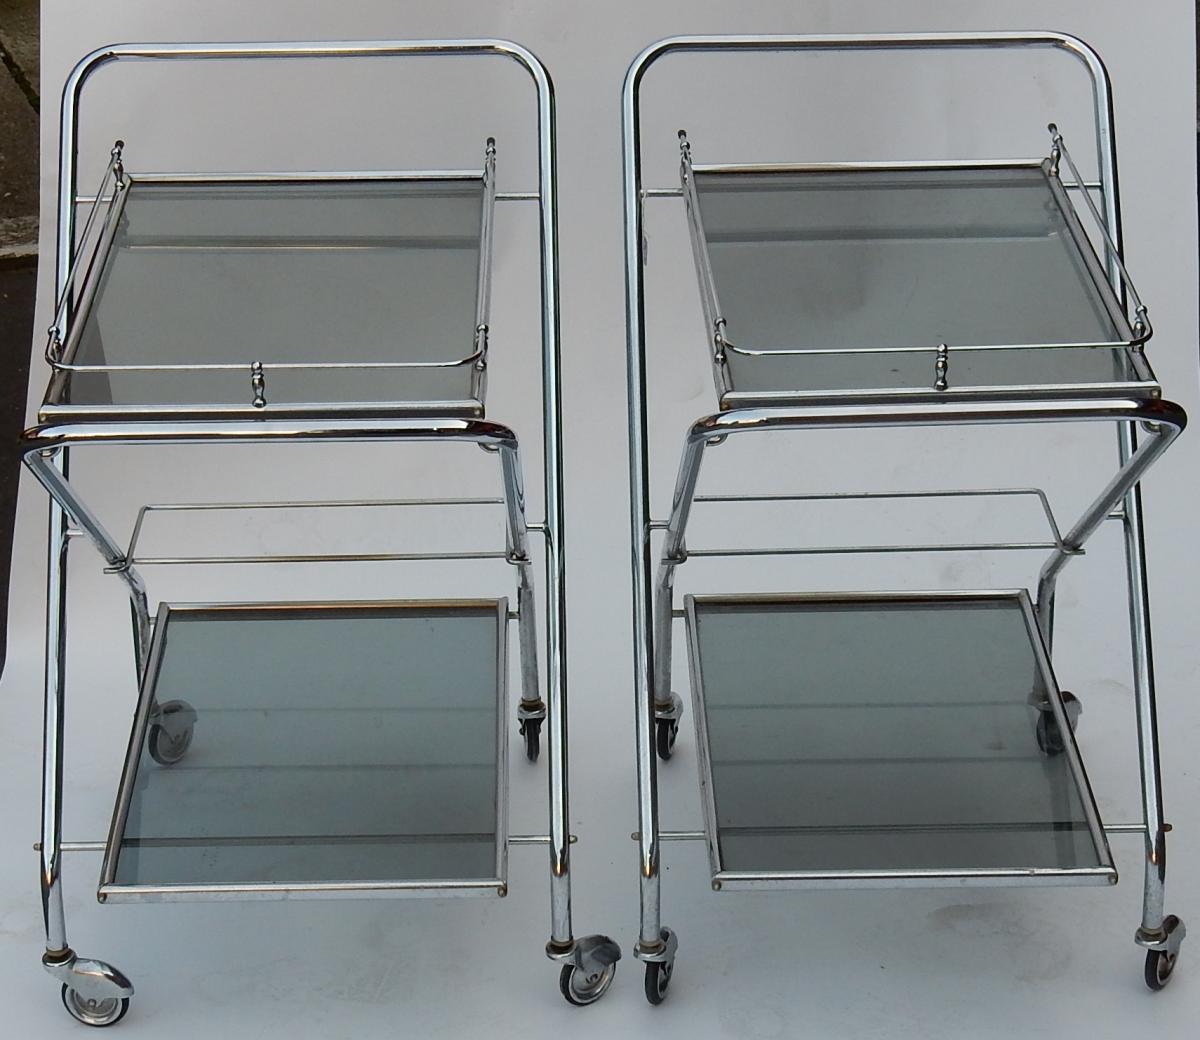 1950/70's  Rolling Bar Of Journey And Campstool, In Chrome-plated Metal In The Style Of